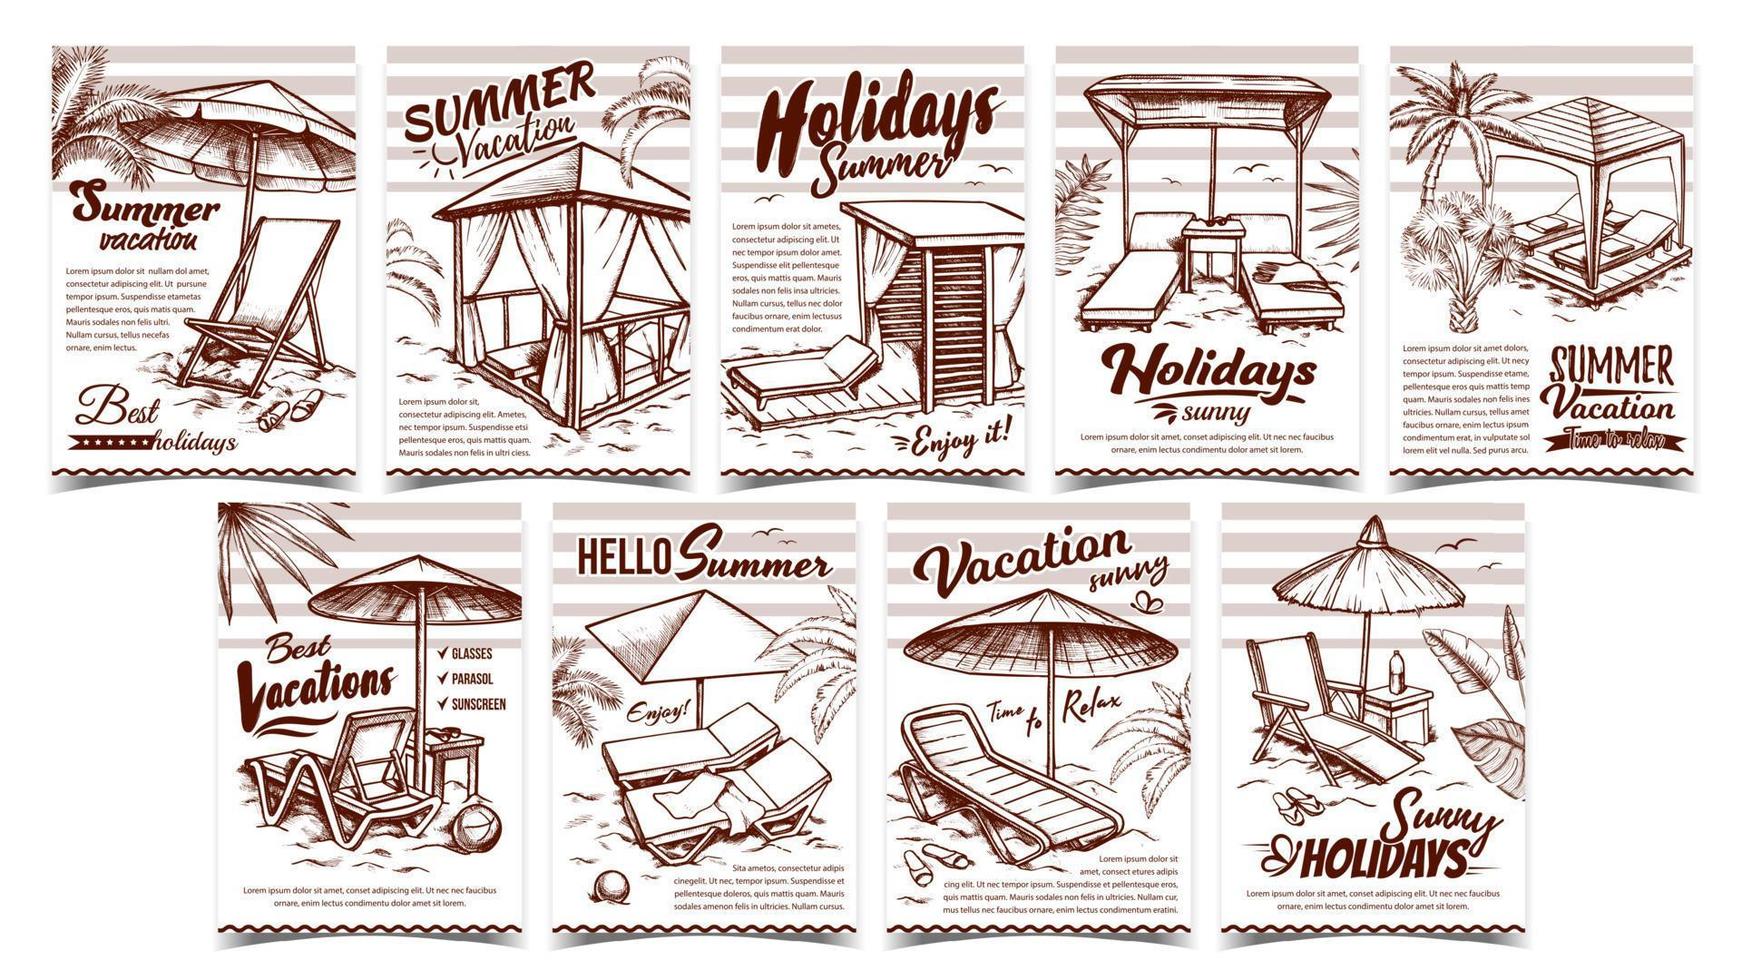 Summer Vacation Advertising Posters Set Vector